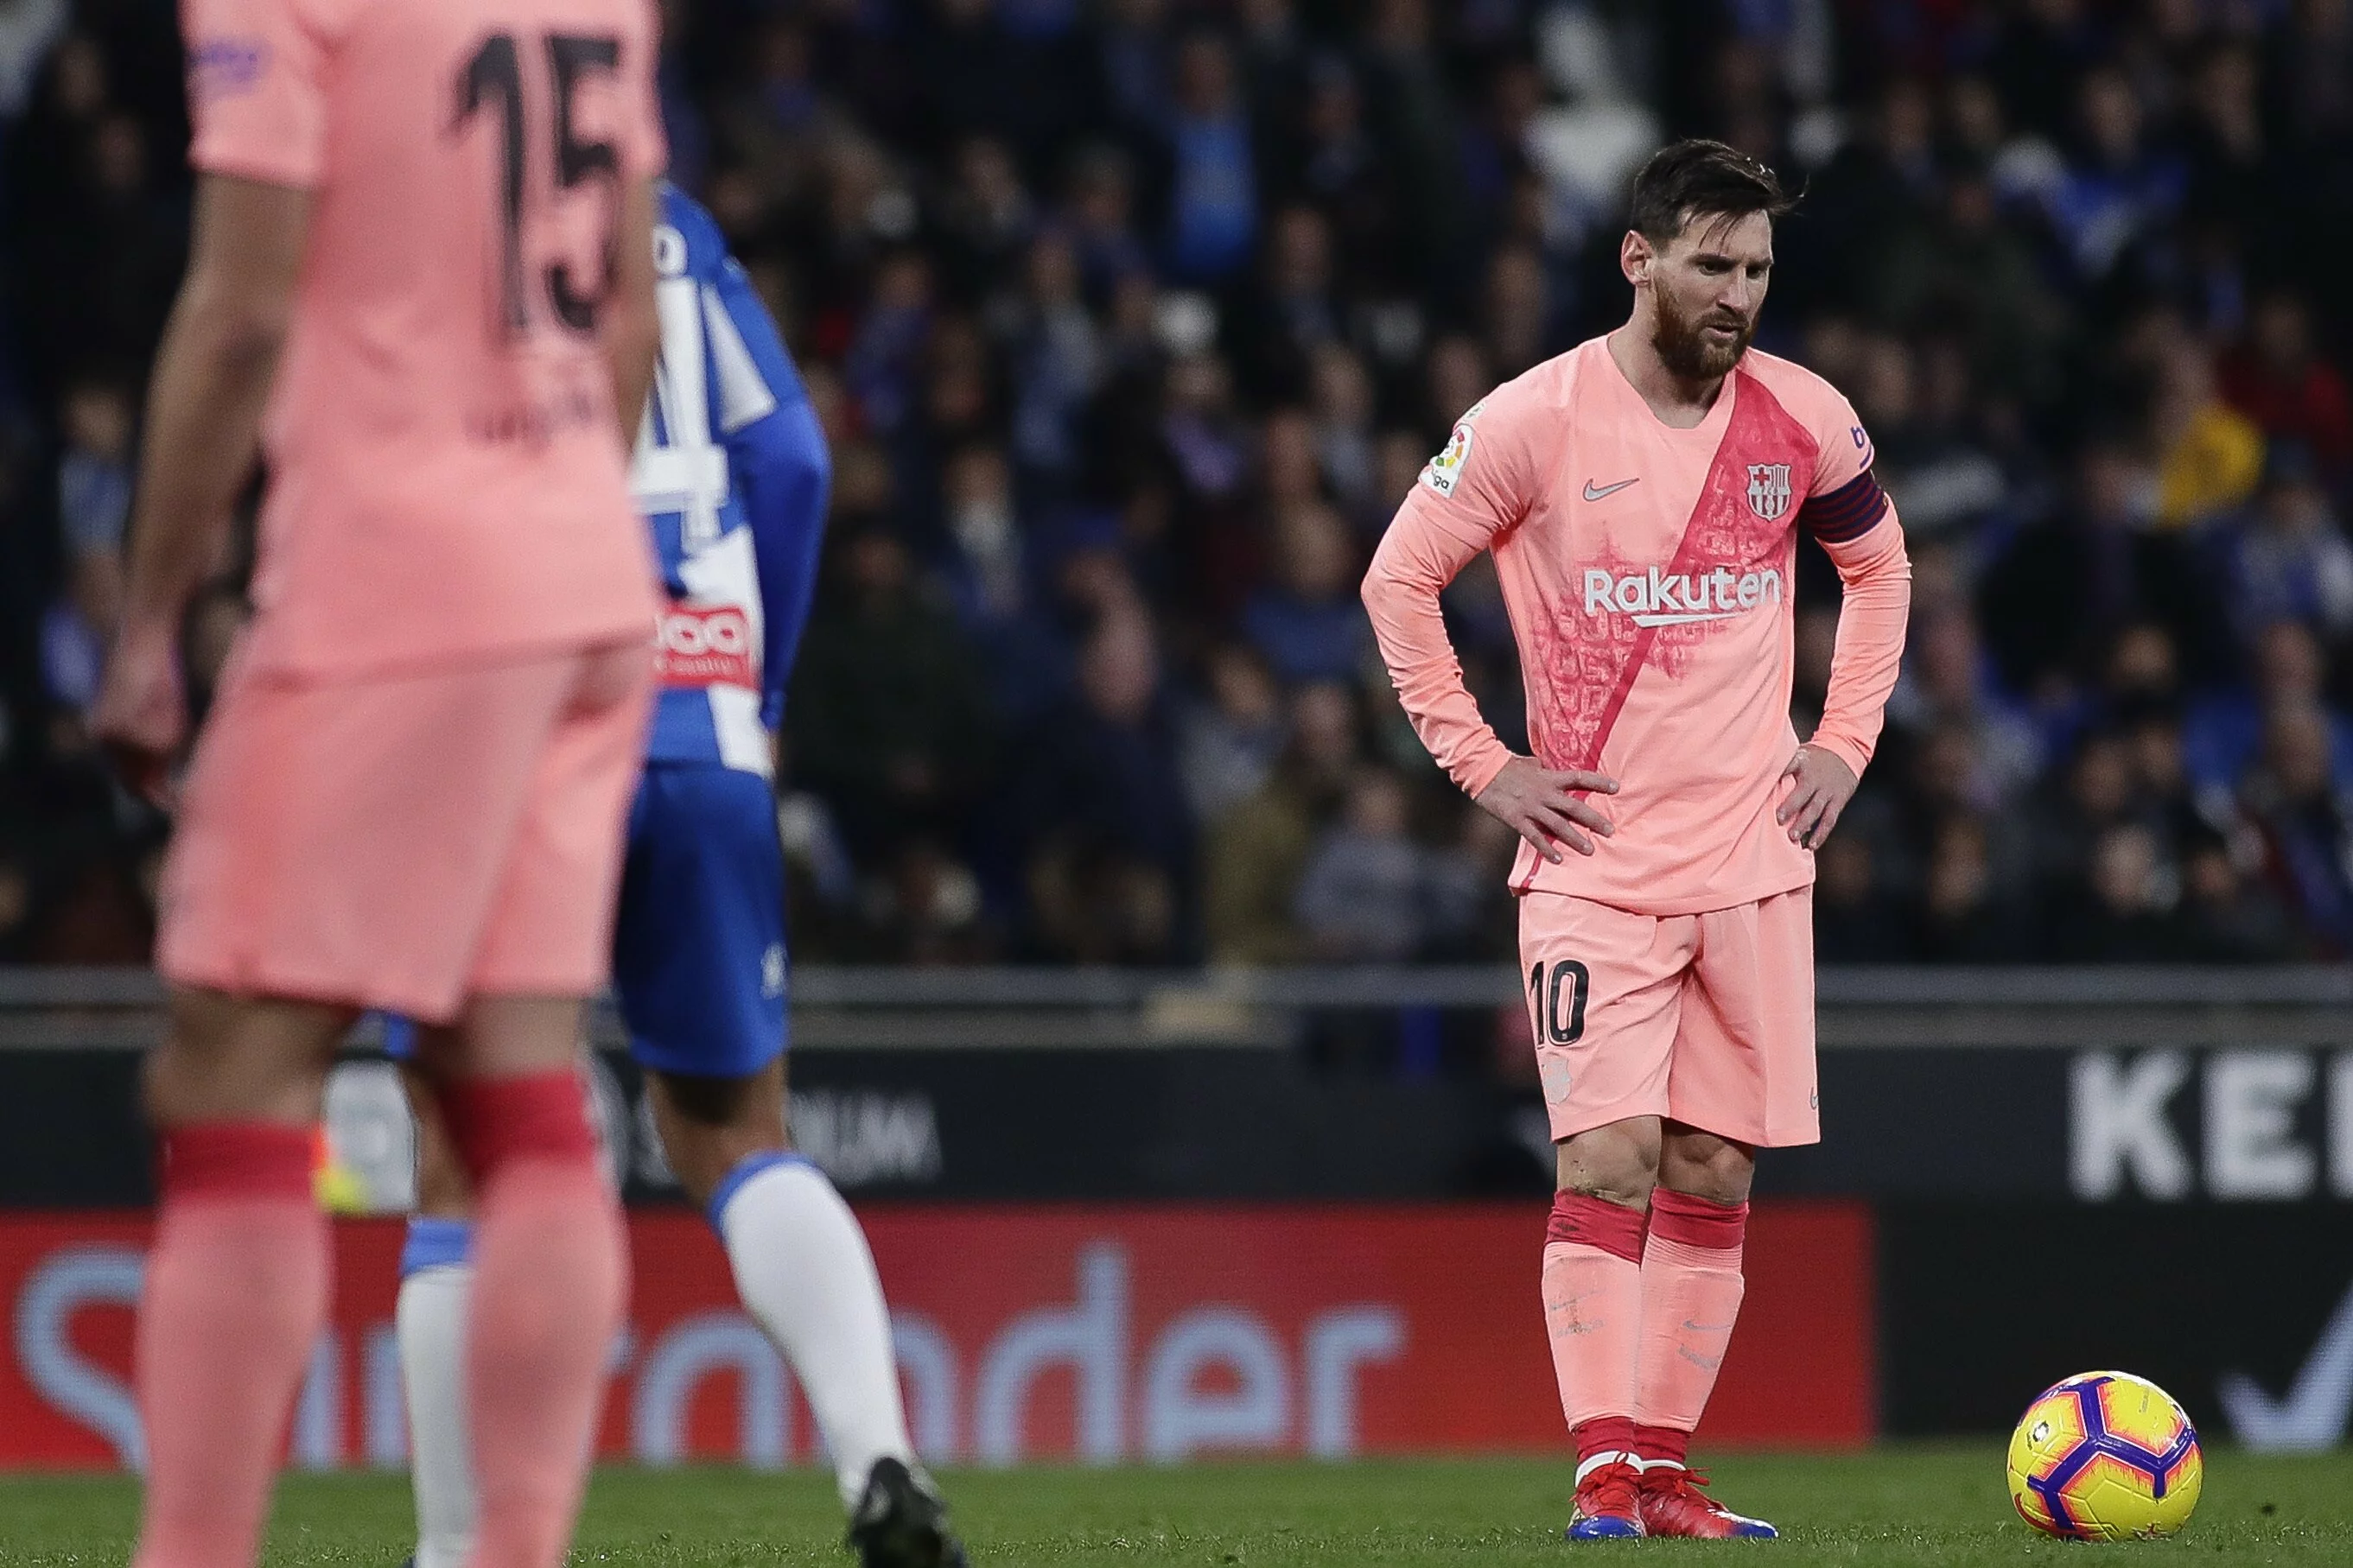 Compilation Shows Messi Is Adept At Scoring All Sorts Of Free Kicks - FootyNews.co.uk